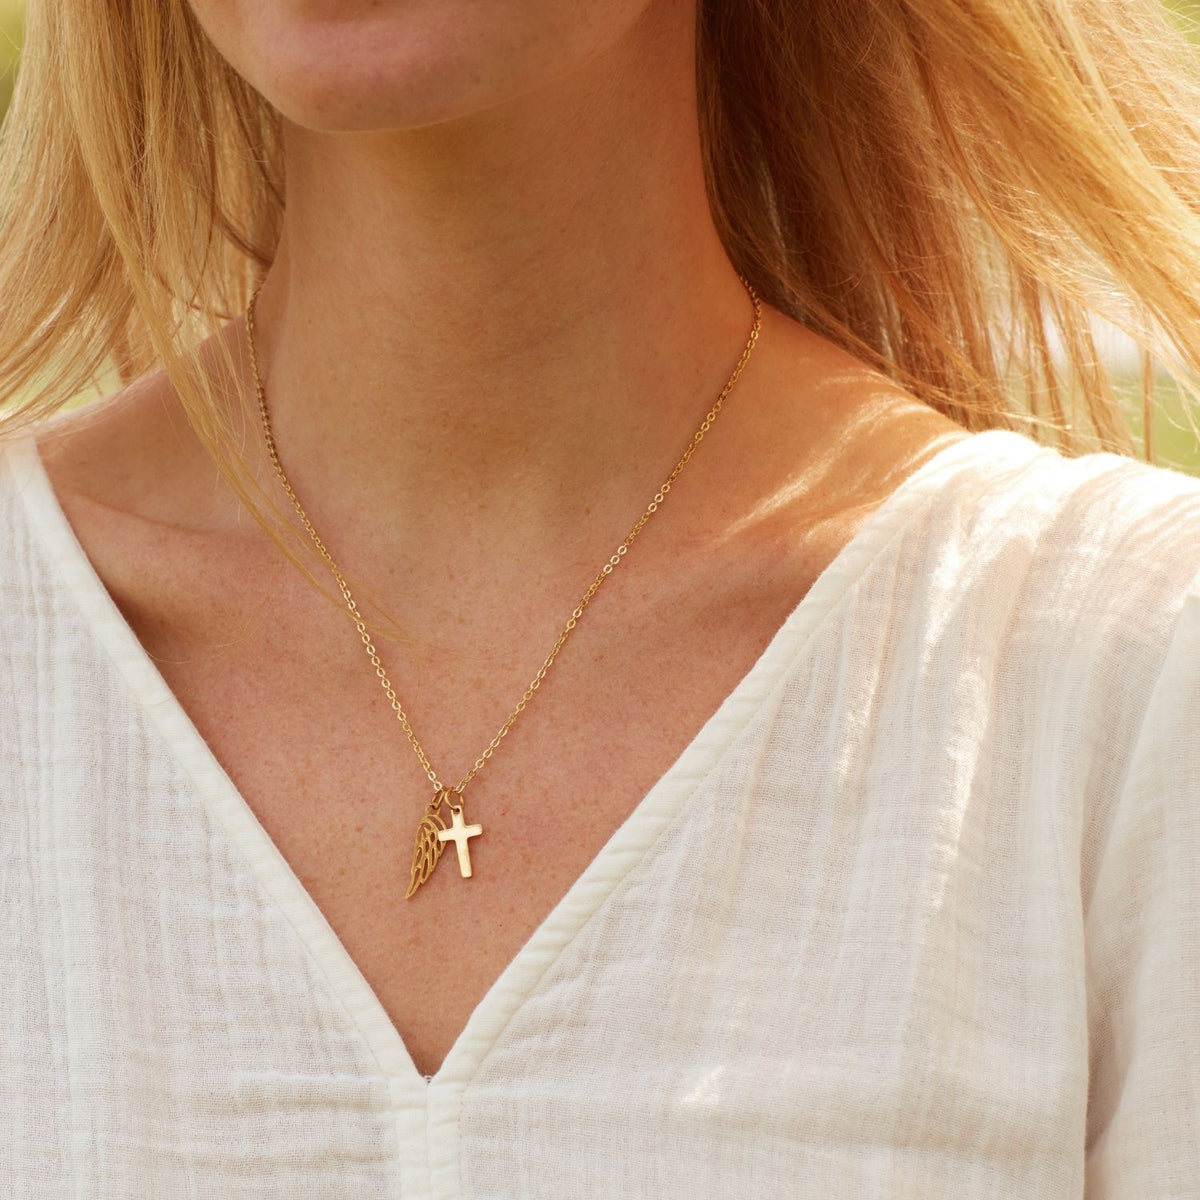 Dear Sister | Night to My Day | Cross Necklace